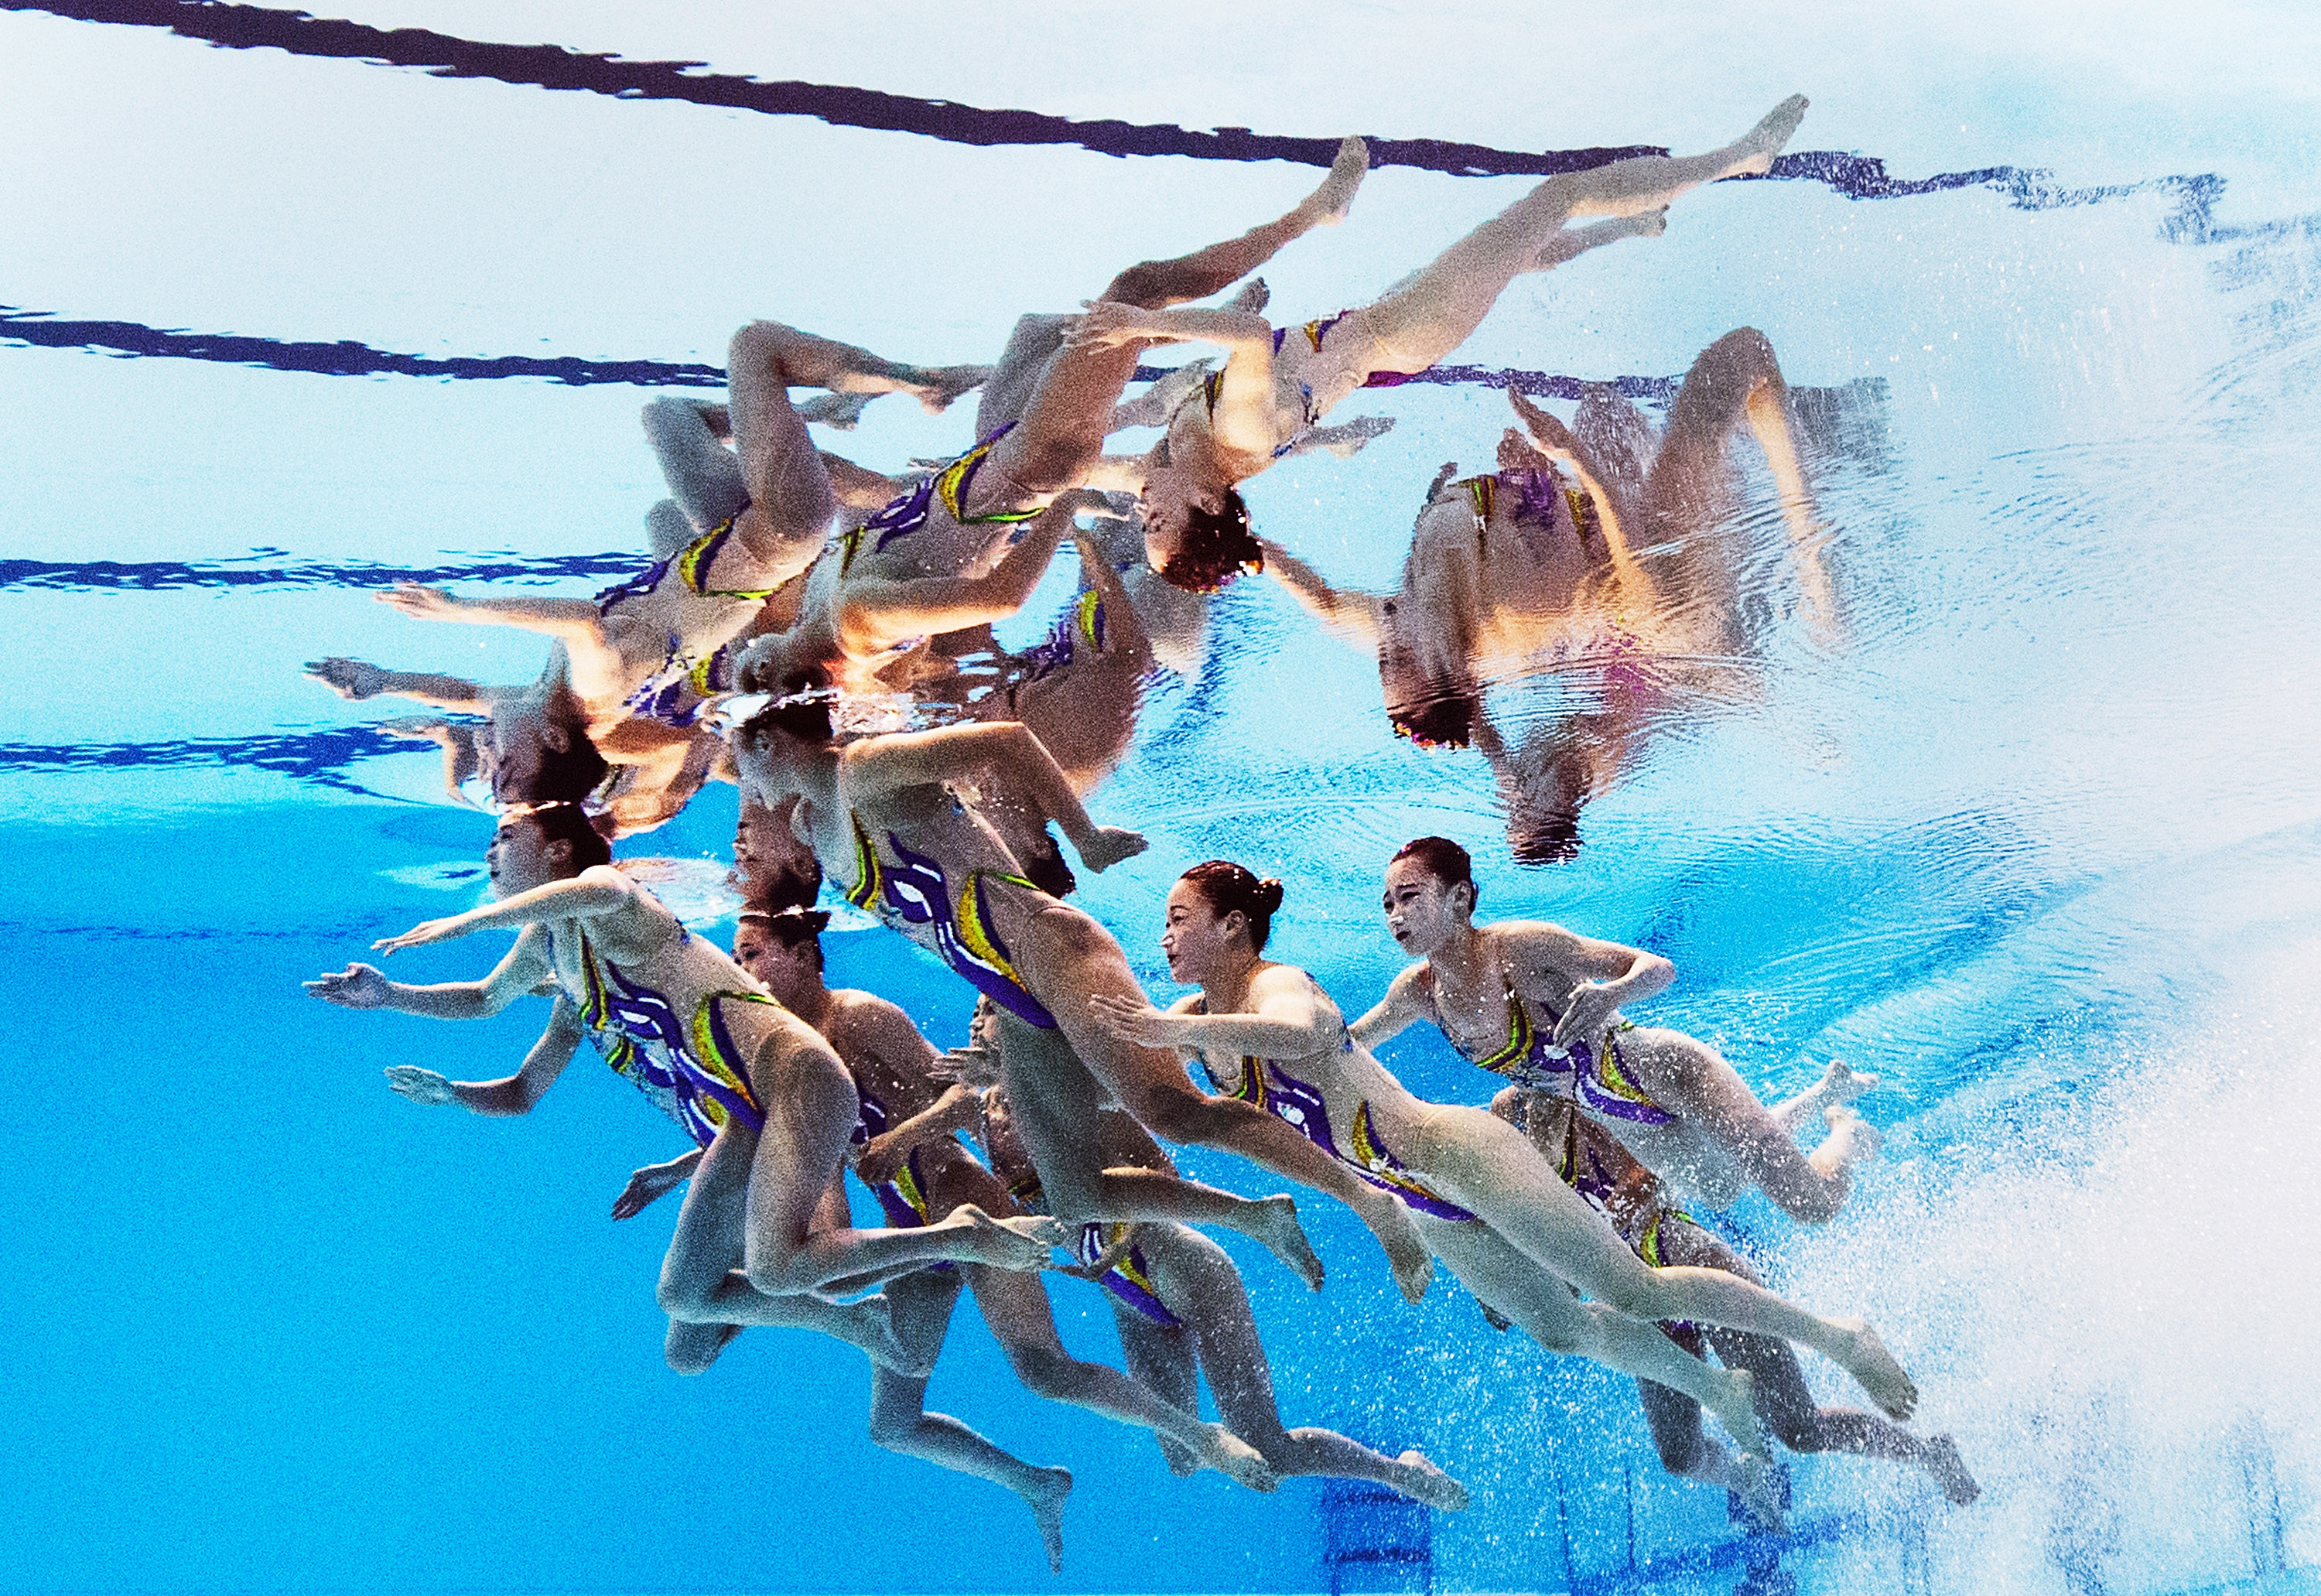 The North Korea team swims before the Women's Team Technical Synchronized Swimming Final at the FINA World Championships on July 27, 2015 in Kazan, Russia.